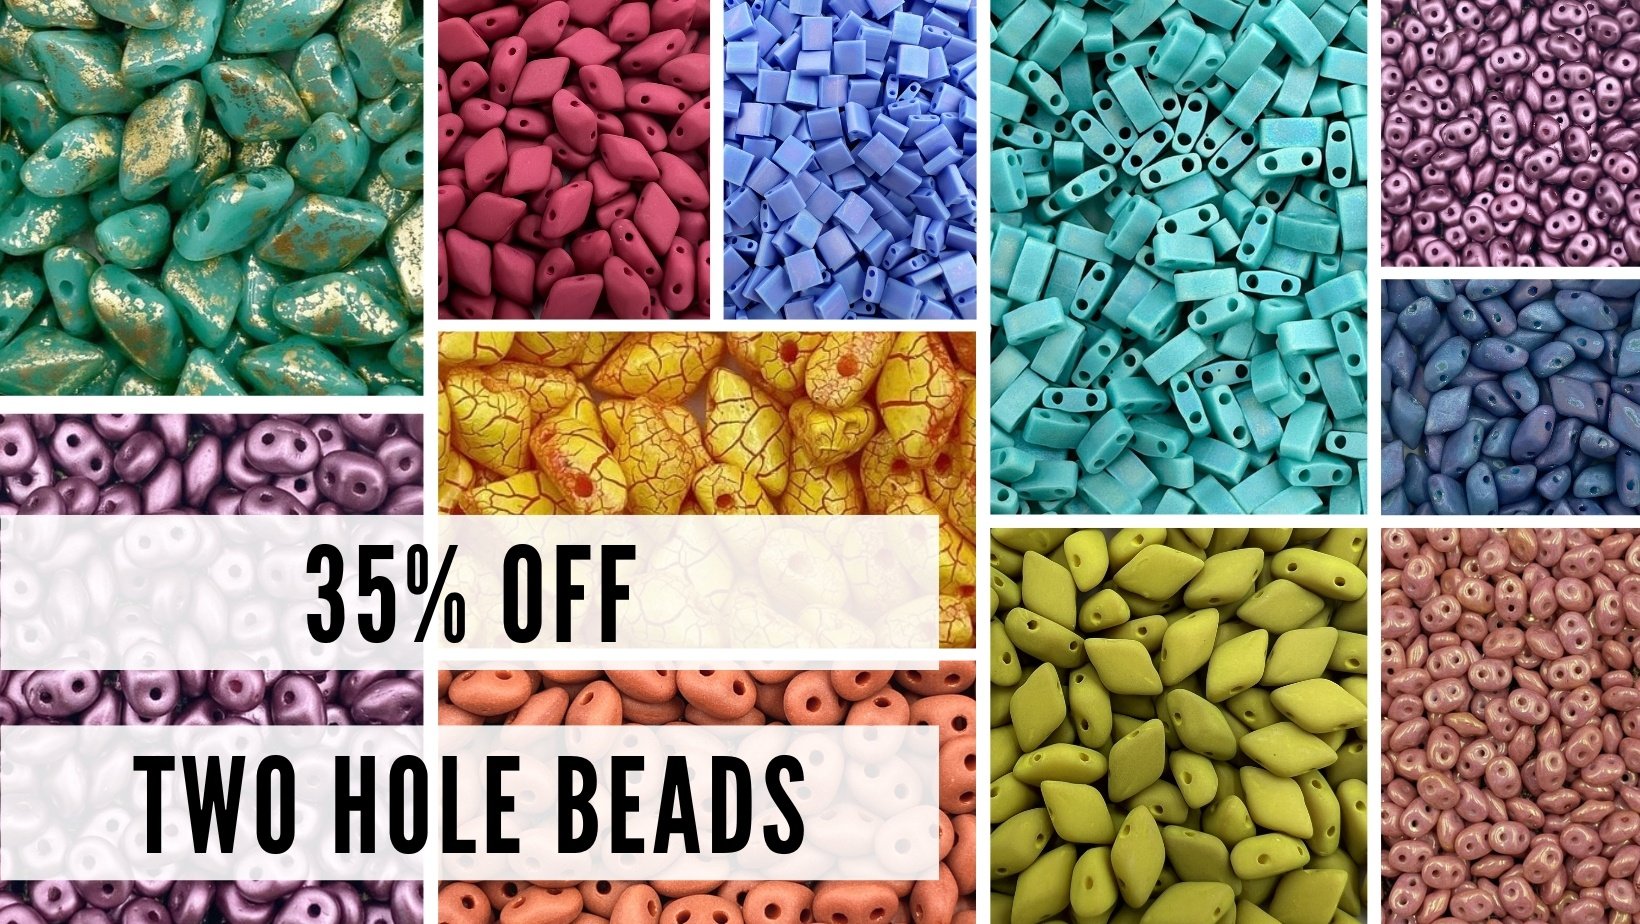 35% OFF TWO HOLE BEADS